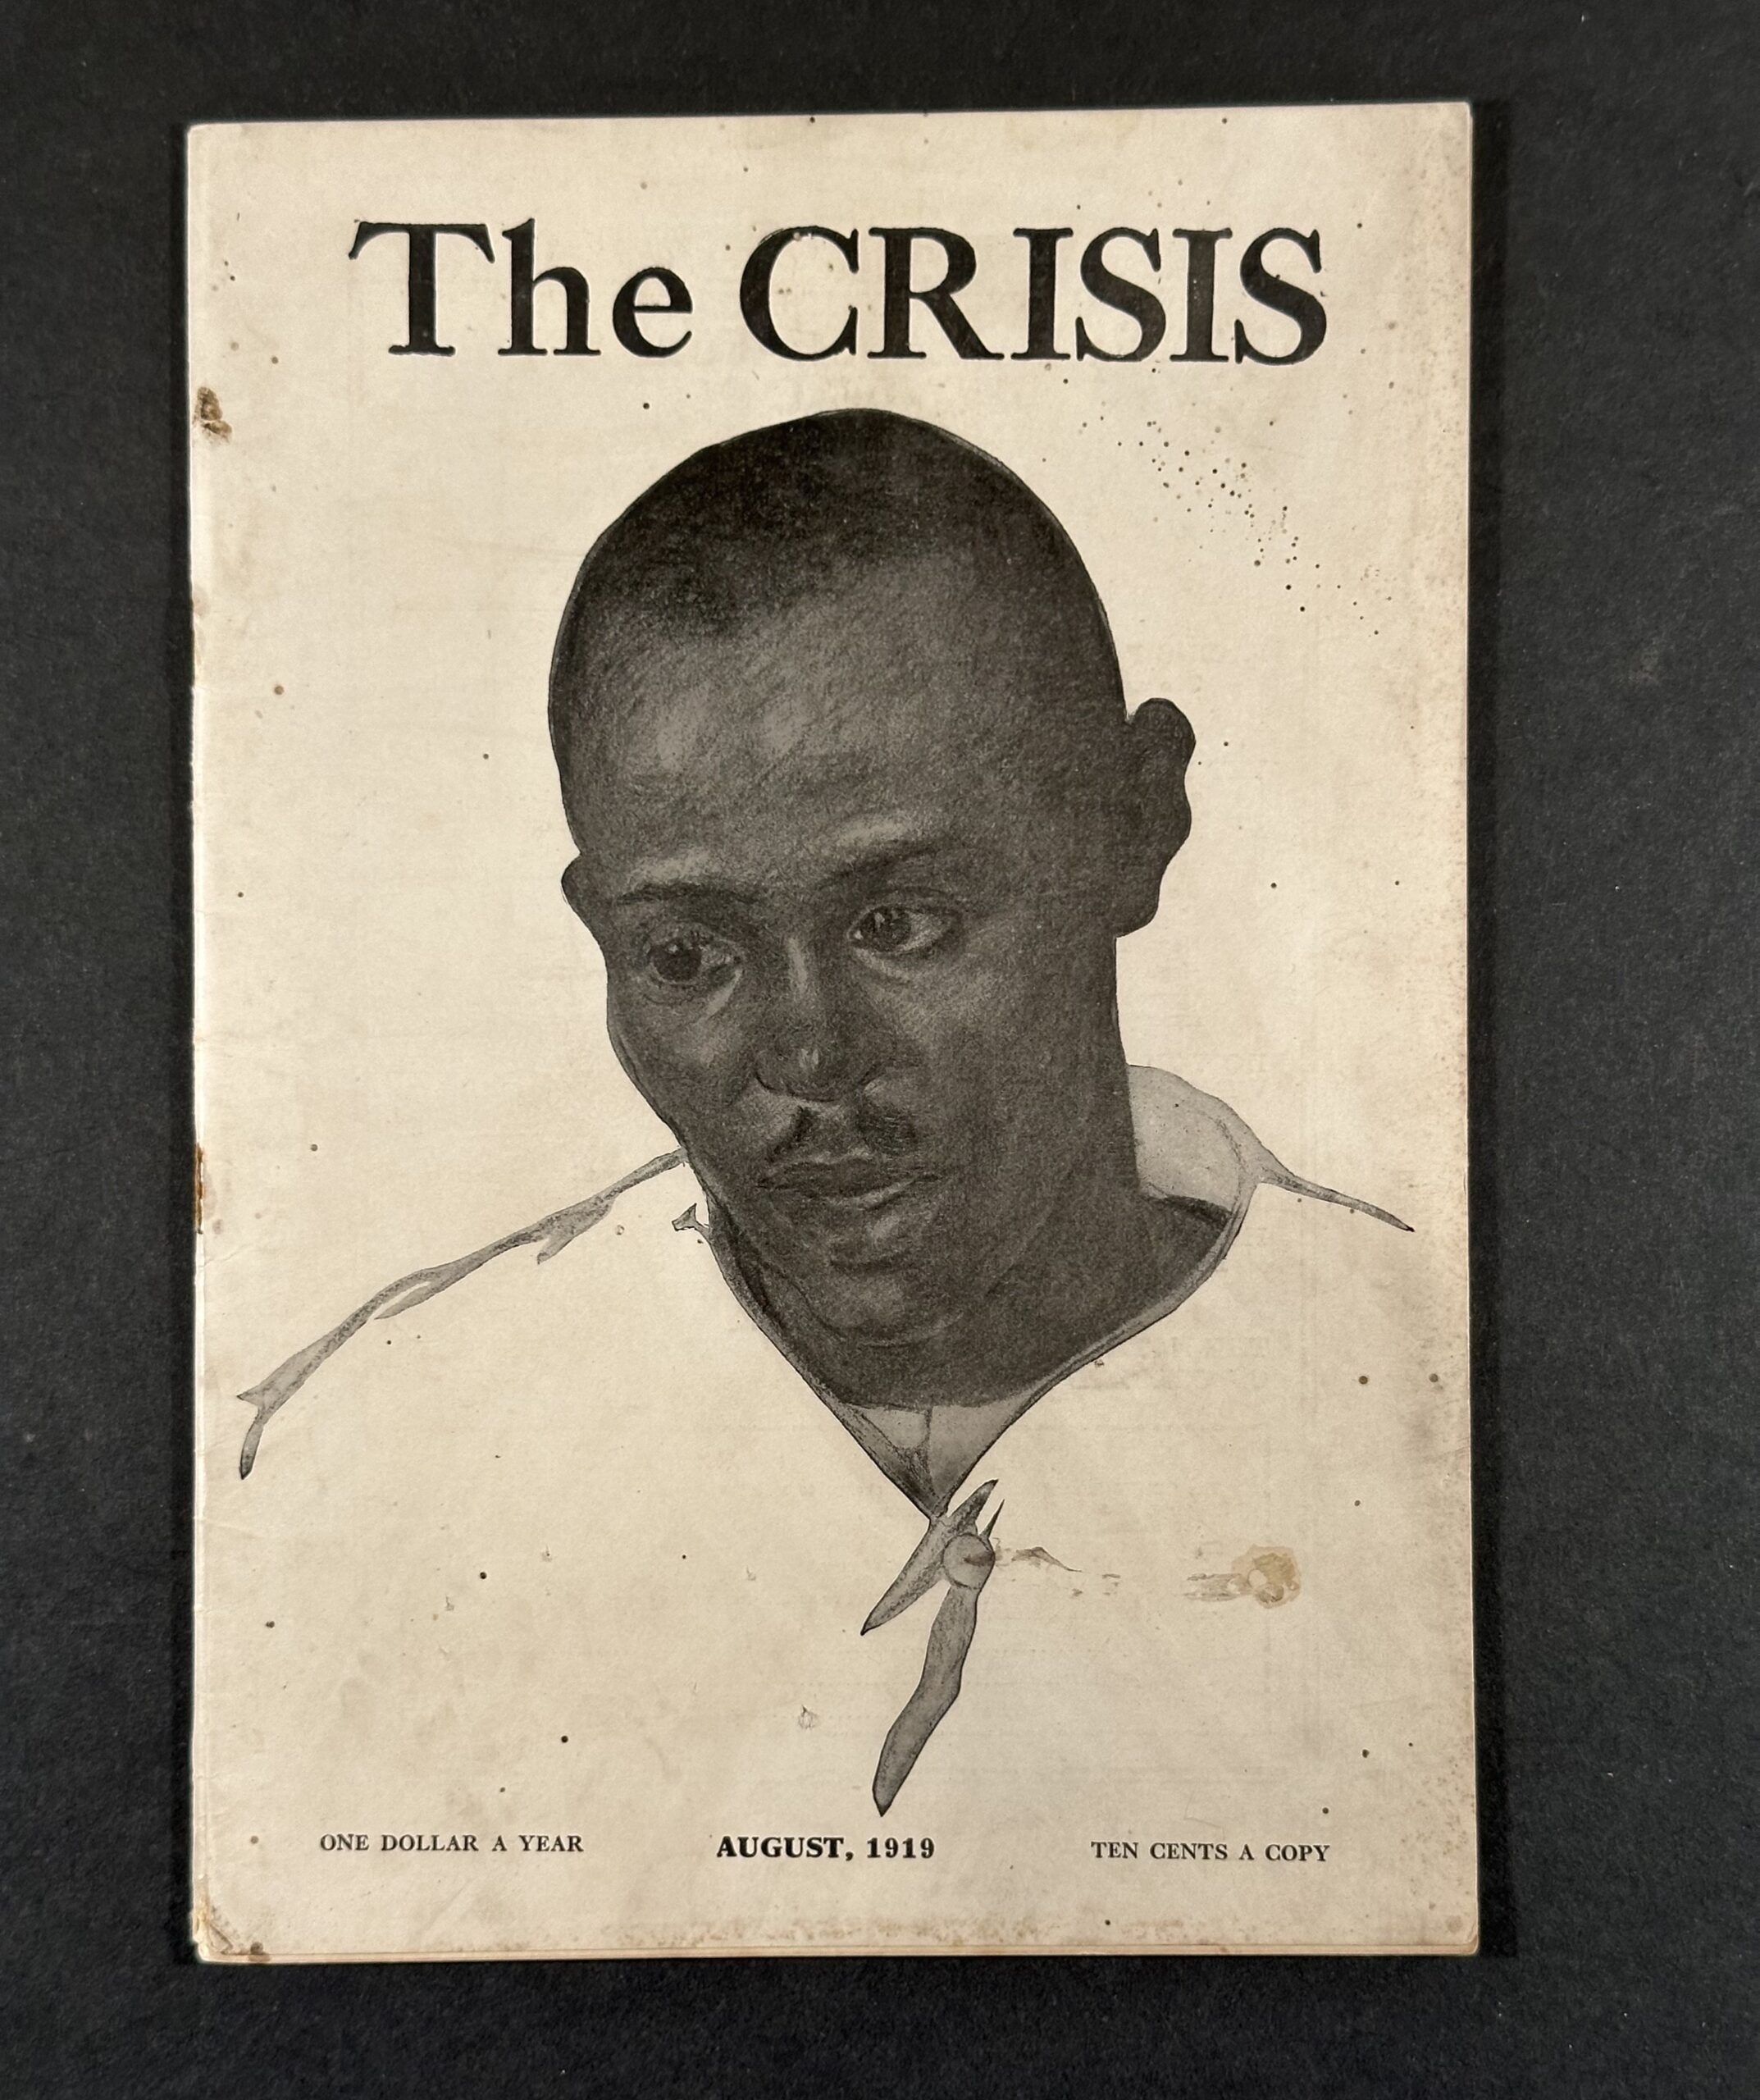 Dubois, W.E.B. The Crisis, [August 1919], from the Alice Dunbar Nelson Papers collection